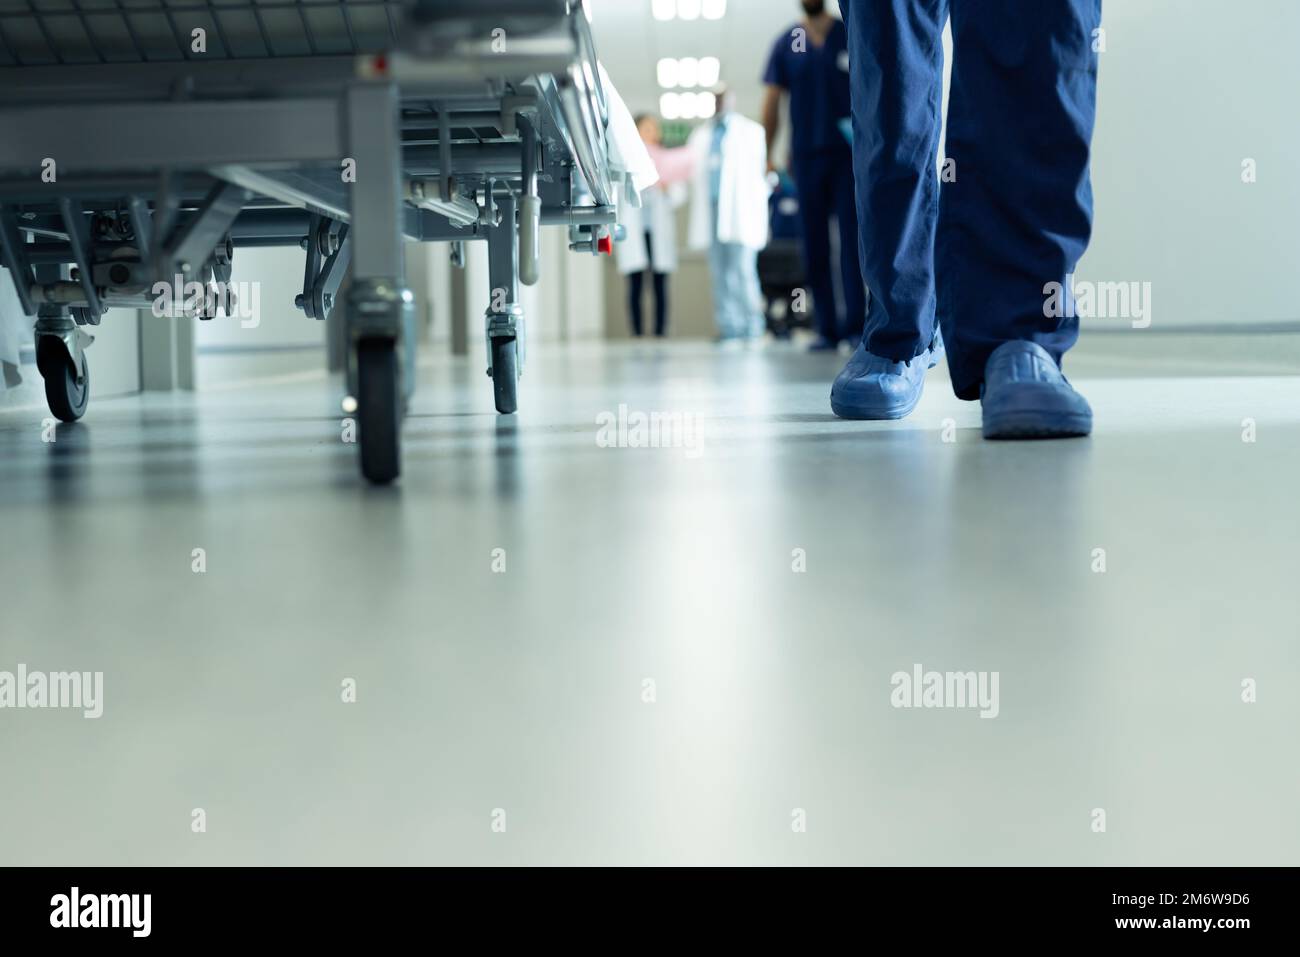 Low section of legs of hospital workers walking and hospital bed in corridor, with copy space Stock Photo